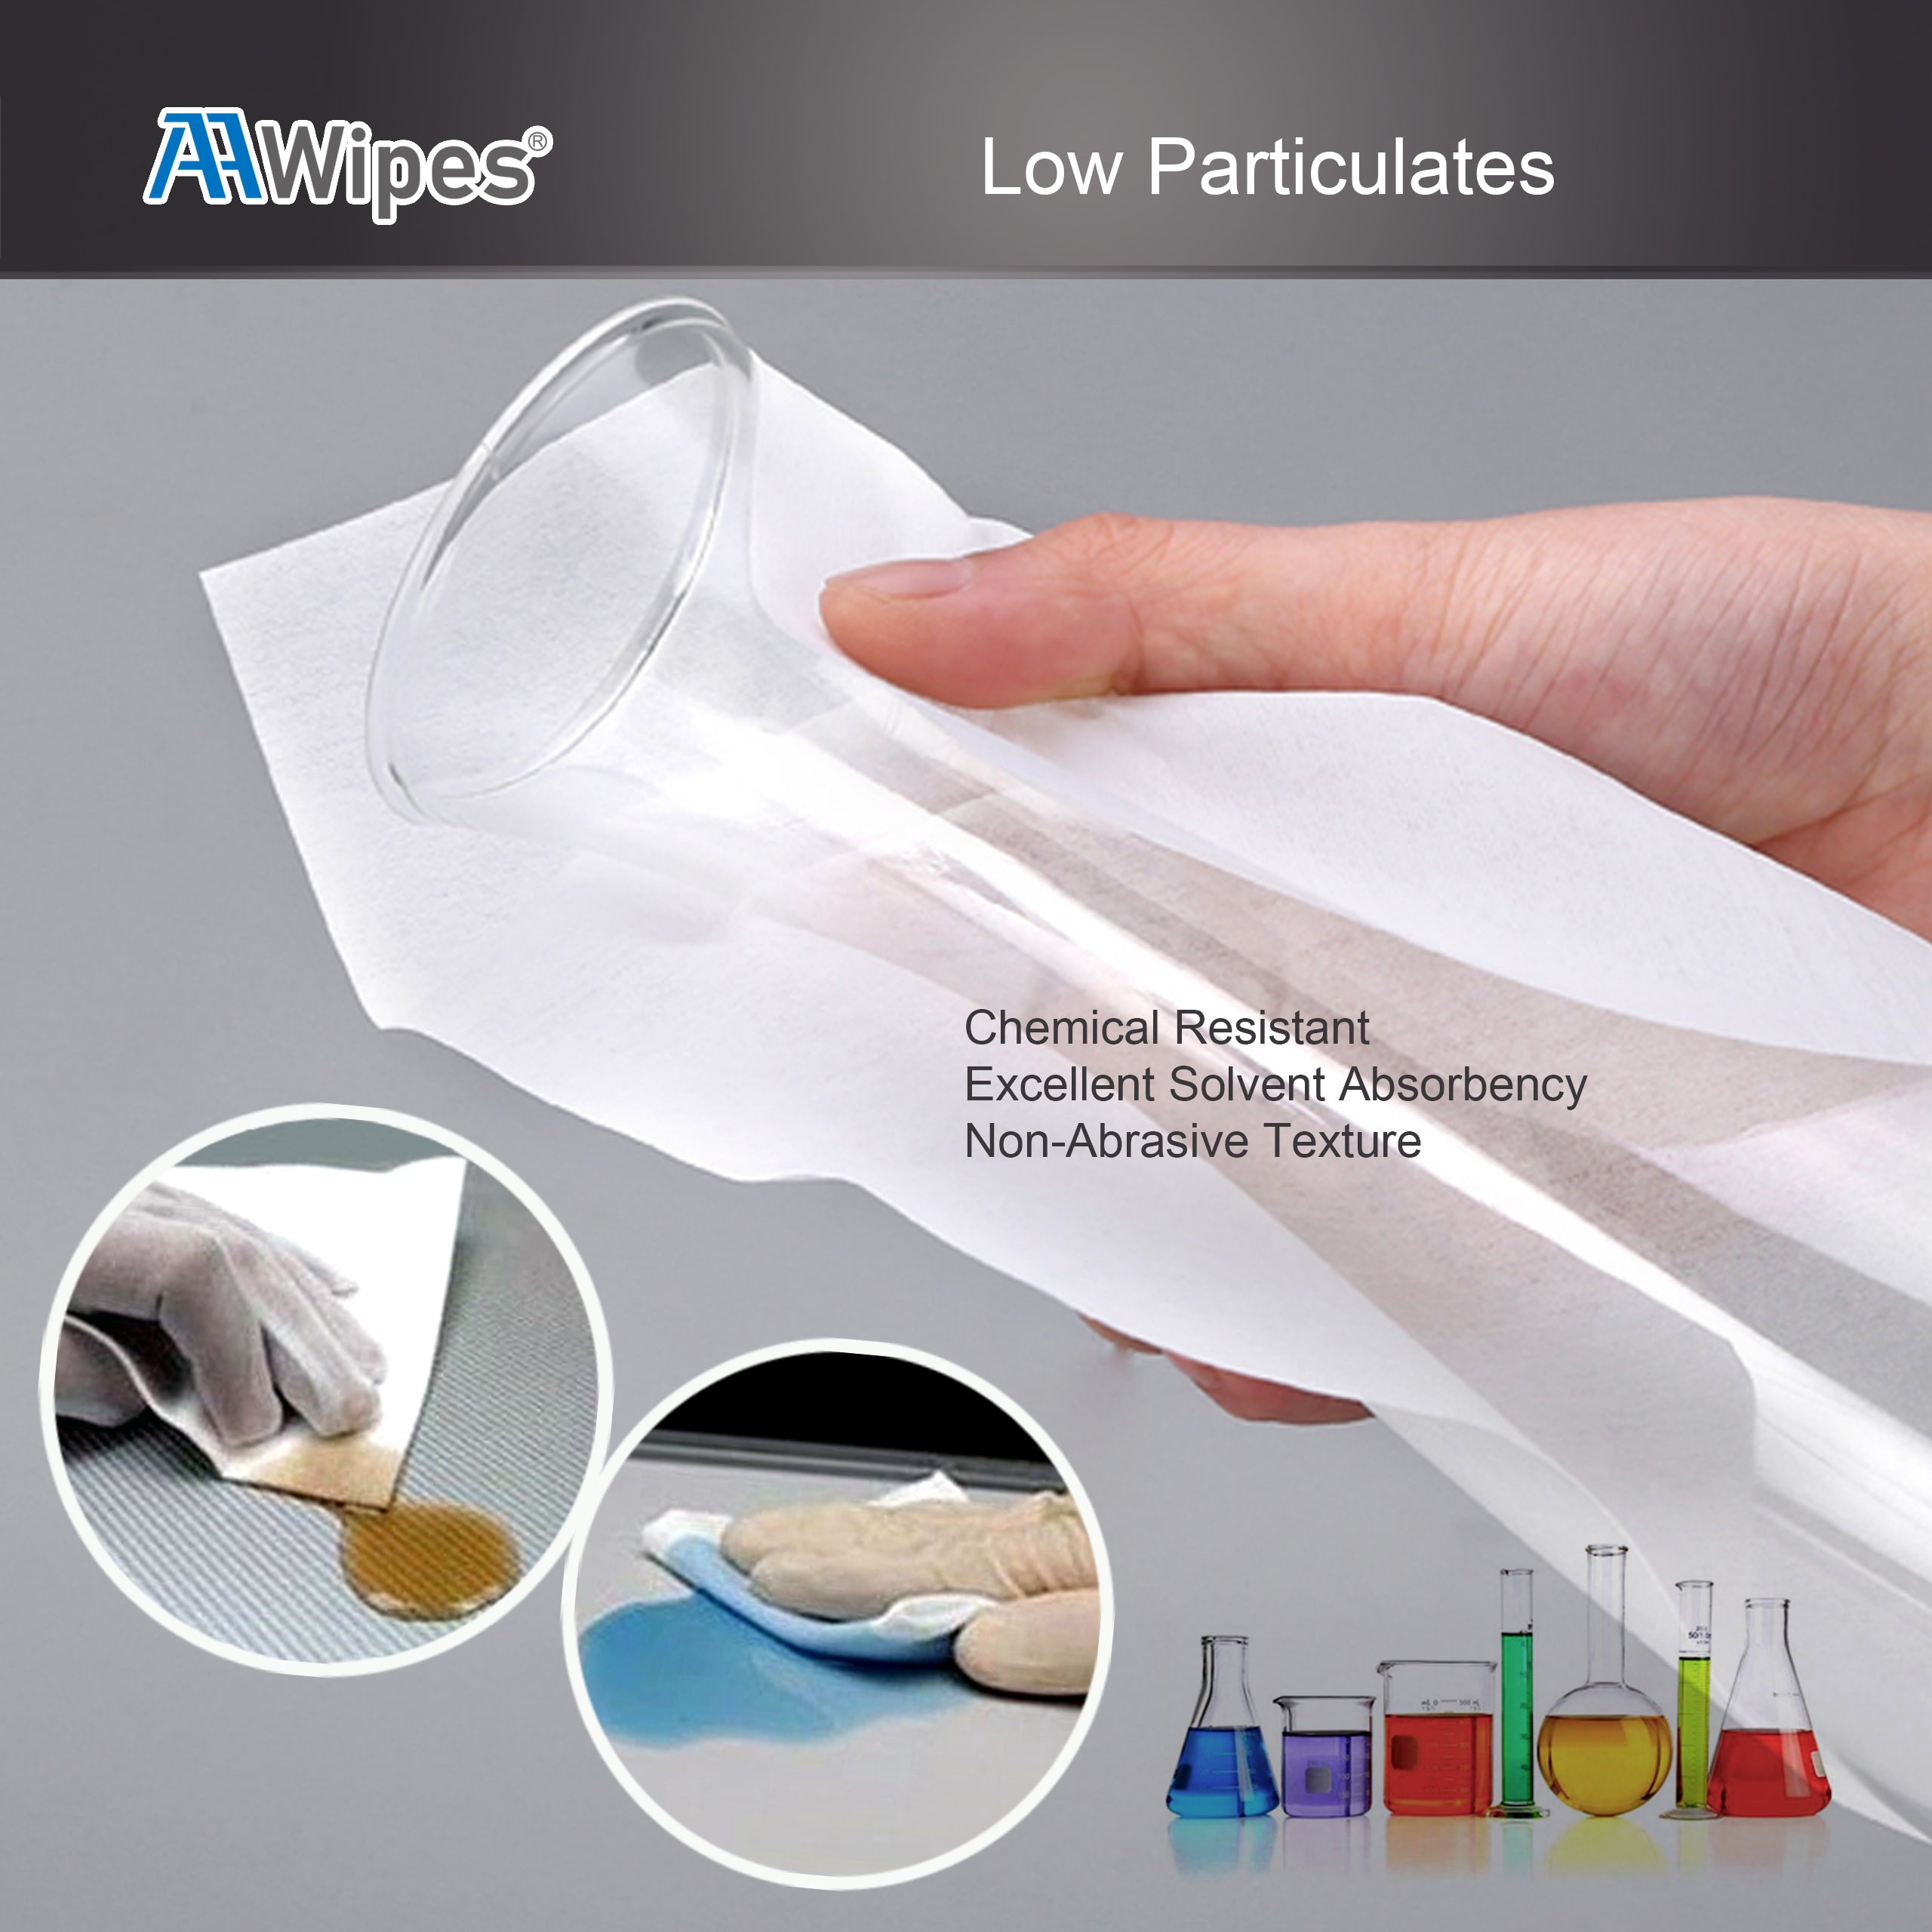 Cleanroom Nonwoven Wipes: 4"x4" Cellulose/Polyester Wiping Cloth for Lab, Electronics, Automotive, Printing and Semiconductor Industries. 16,800 wipes/box in 28 bags (No. NW06804).